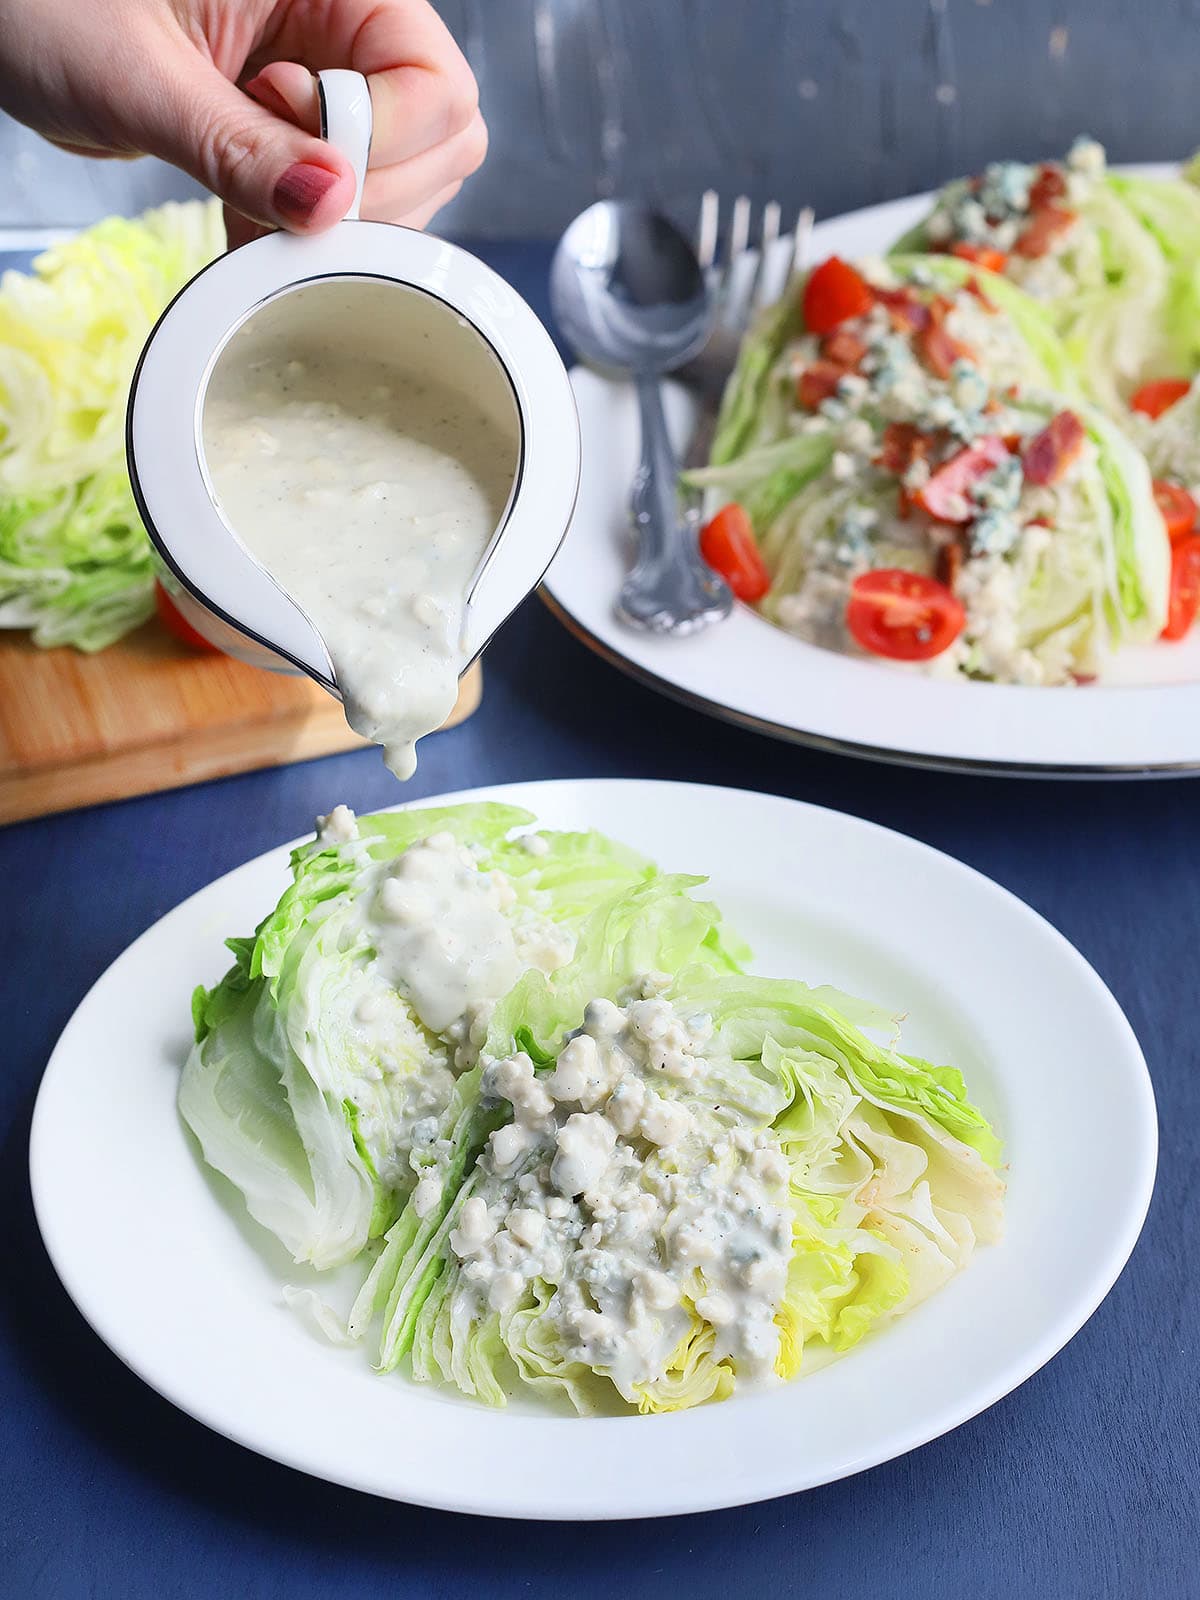 hand pouring blue cheese dressing over a lettuce wedge on a white plate